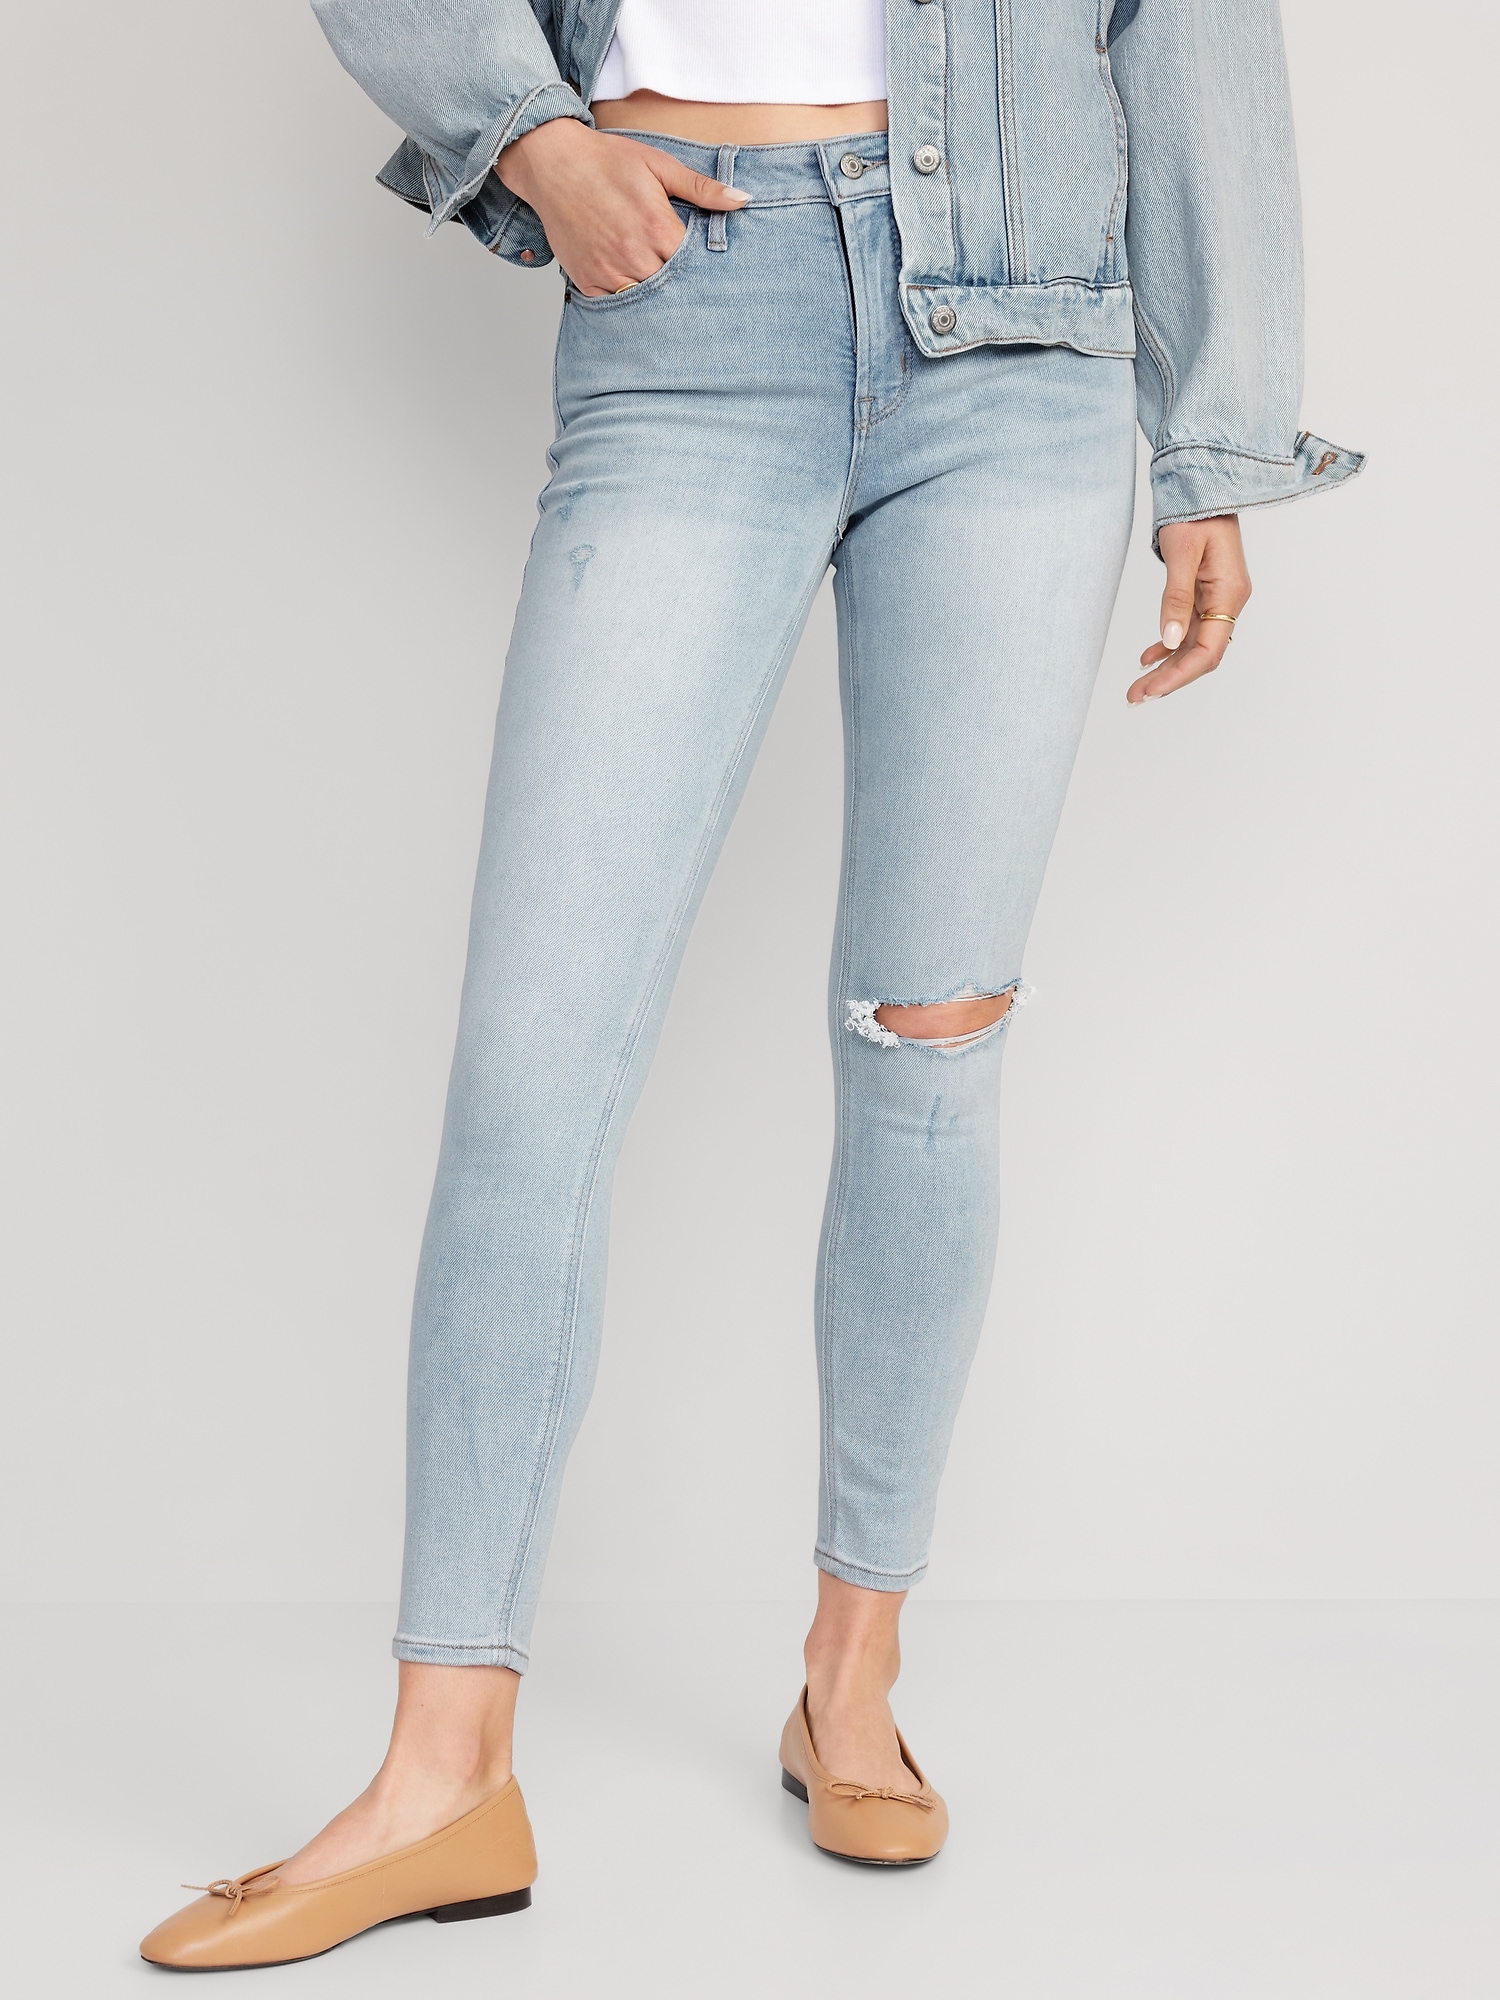 High-Waisted Rockstar Super-Skinny Ripped Jeans